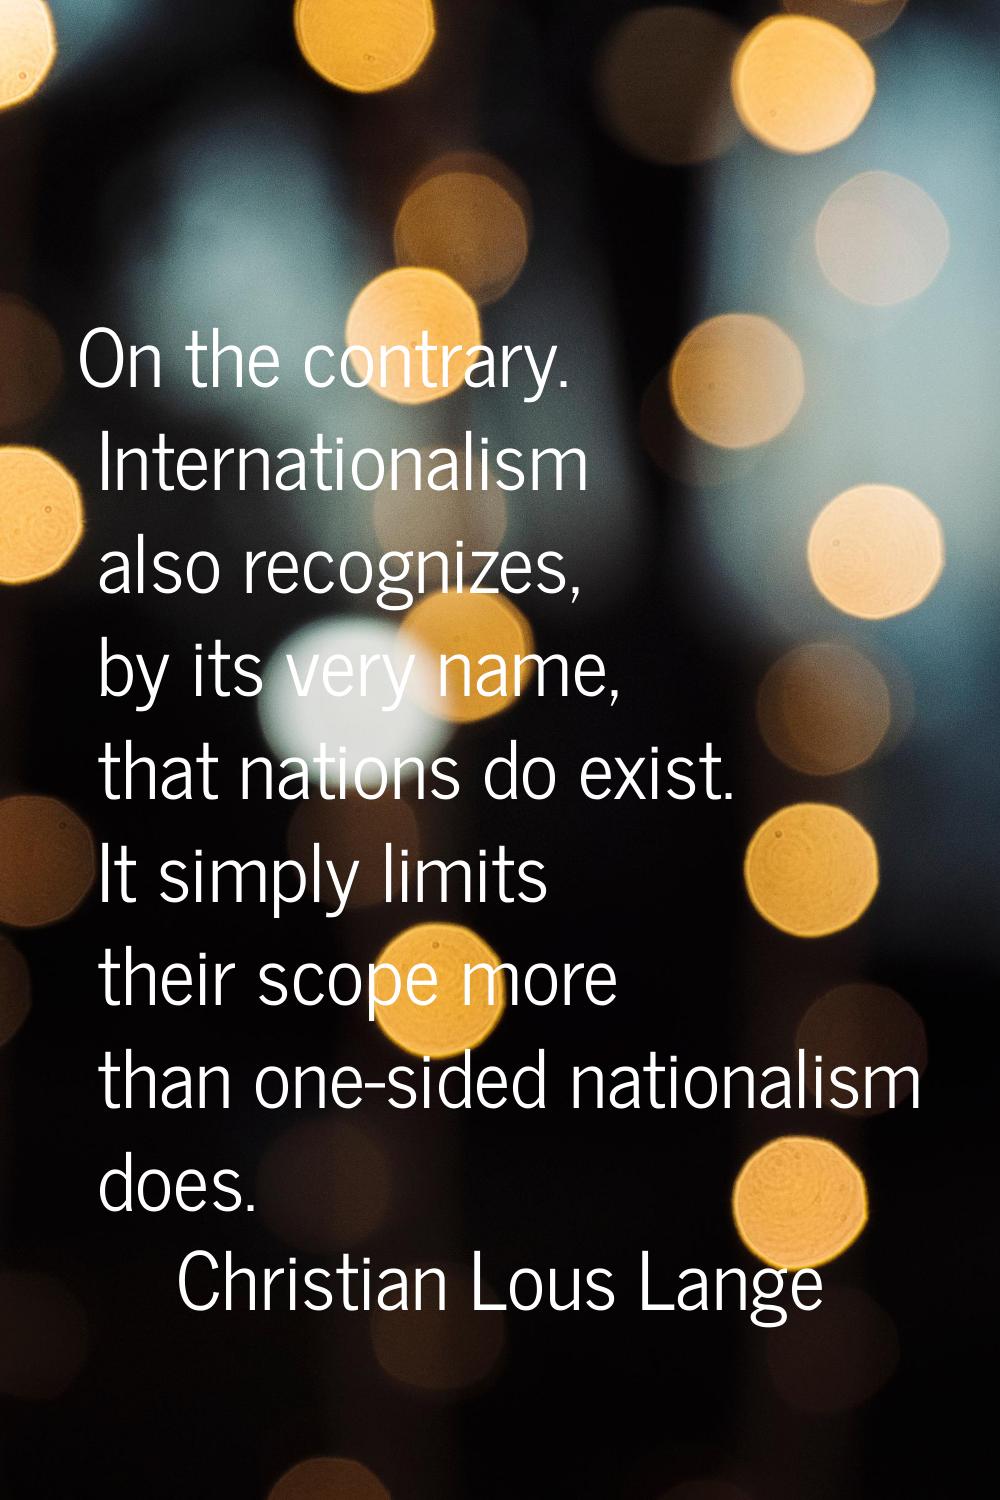 On the contrary. Internationalism also recognizes, by its very name, that nations do exist. It simp